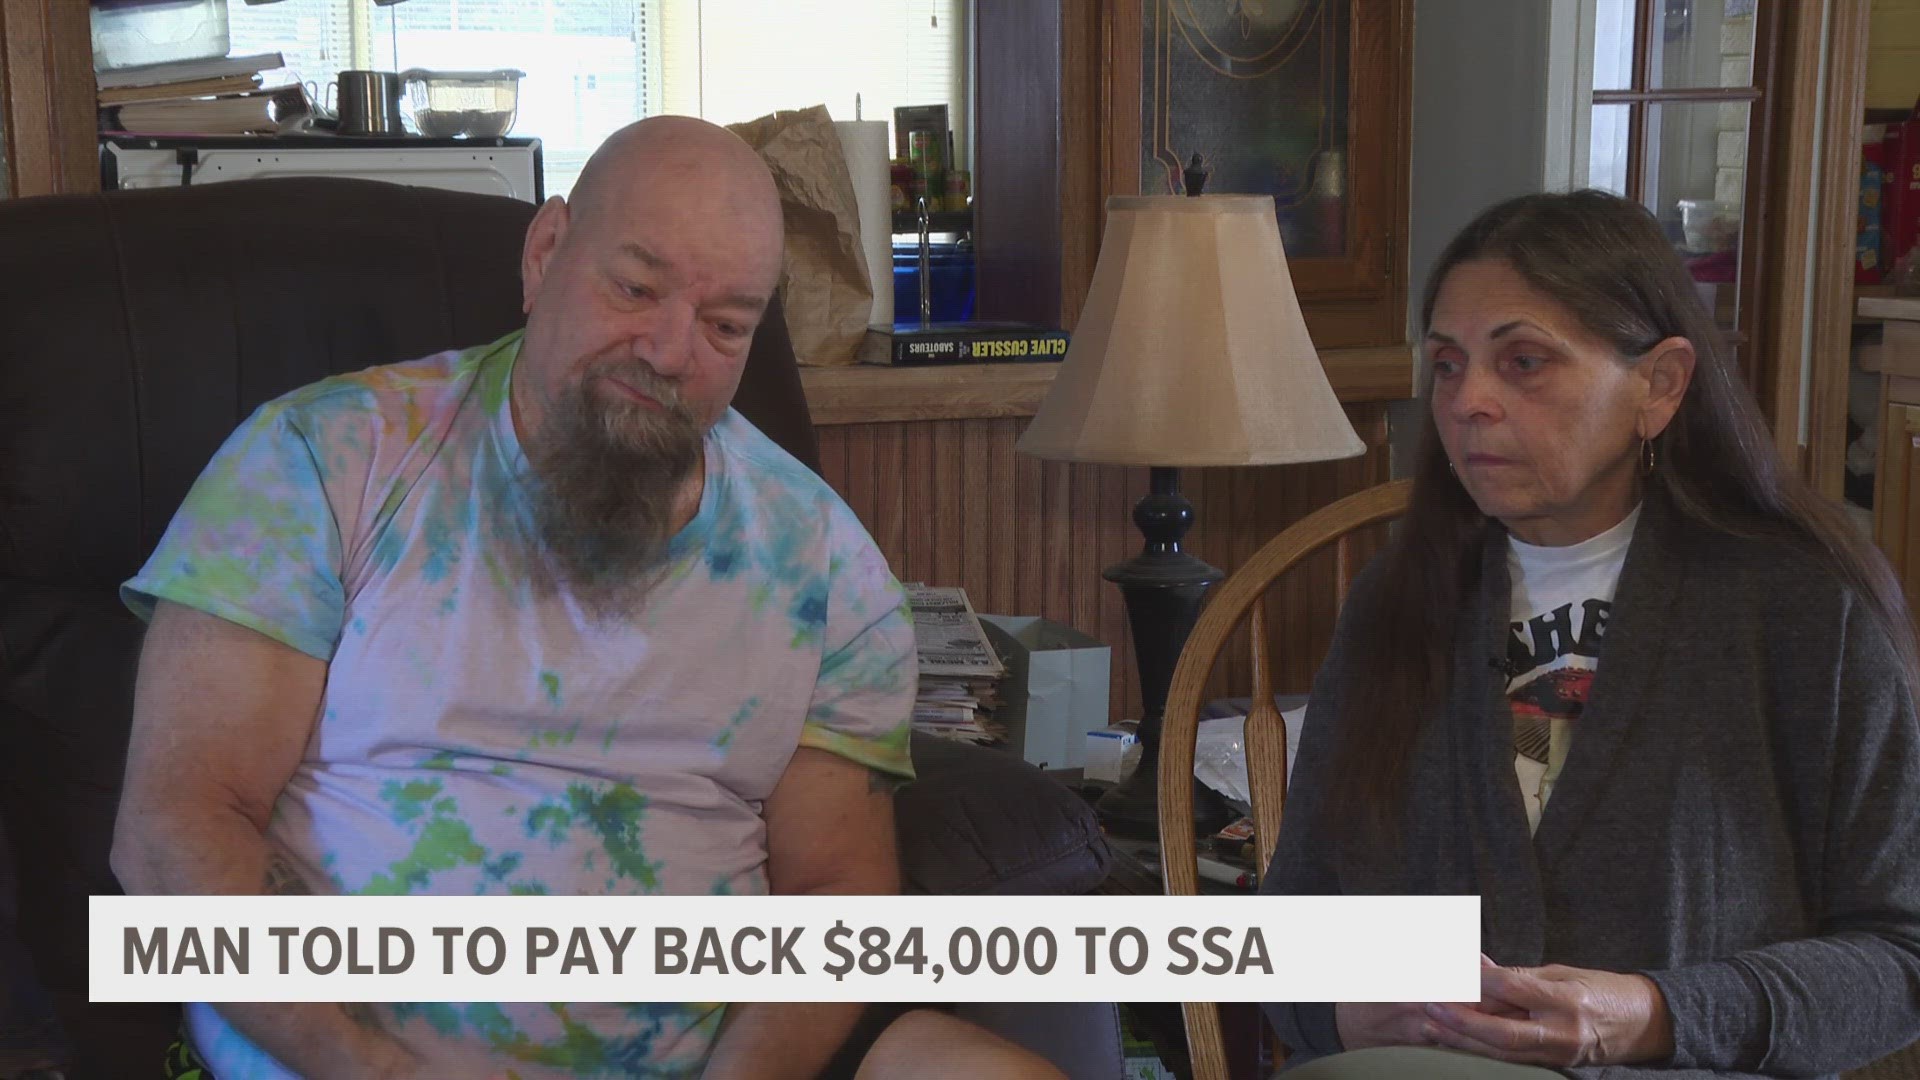 Dave Wilder received a letter from Social Security that stated he was overpaid during the pandemic and must pay $84,000, along with having his payments cut.